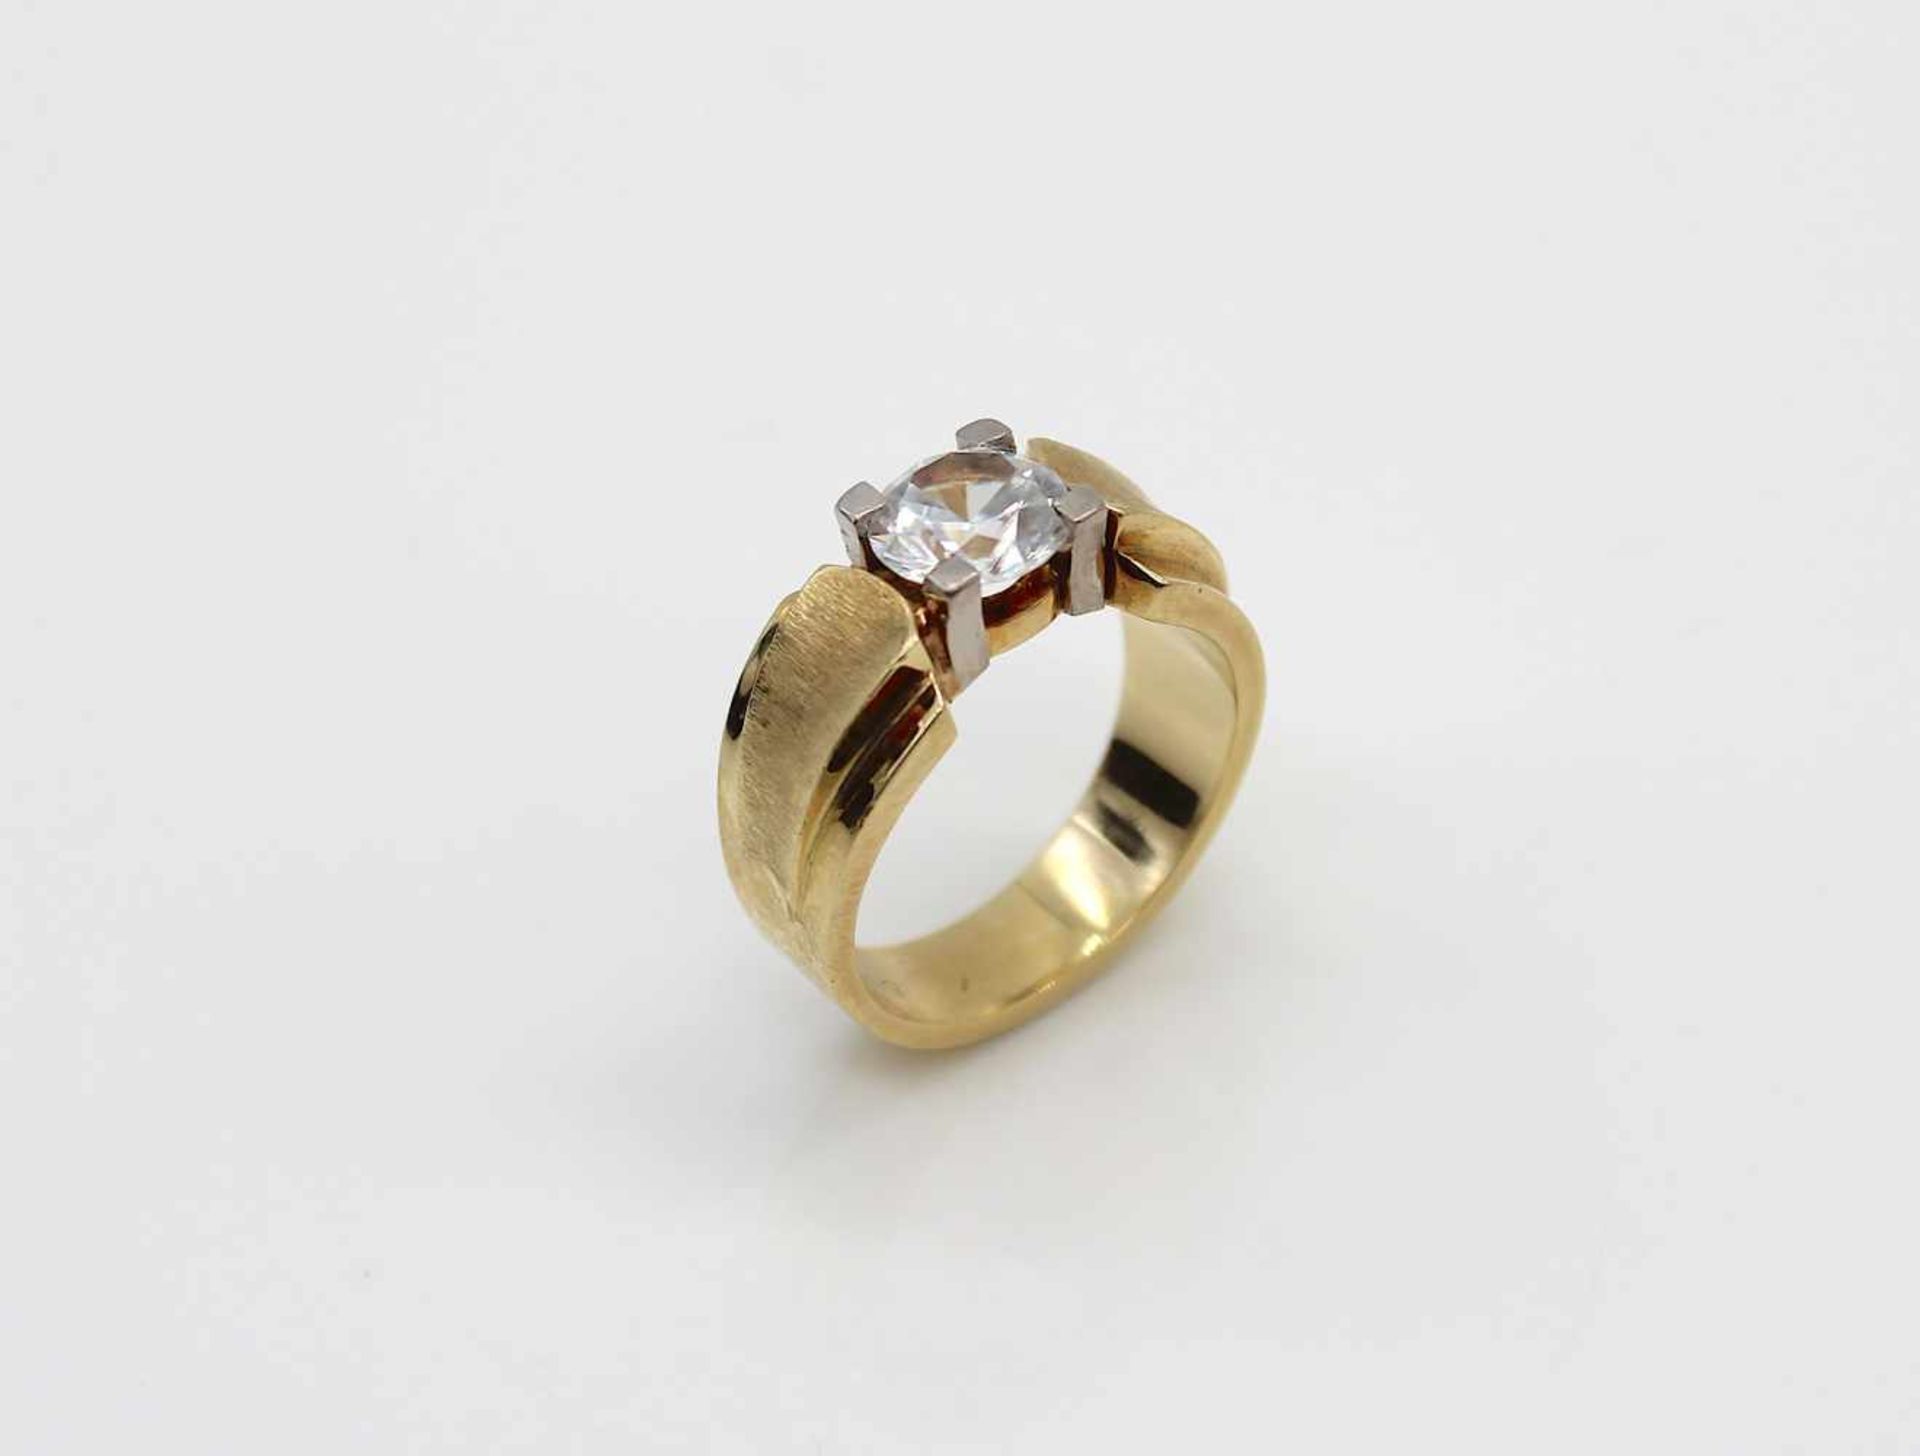 Ring made of 585 gold with a zircon 2,5 ct.Weight 12.5 g, size 58- - -15.00 % buyer's premium on the - Bild 3 aus 3